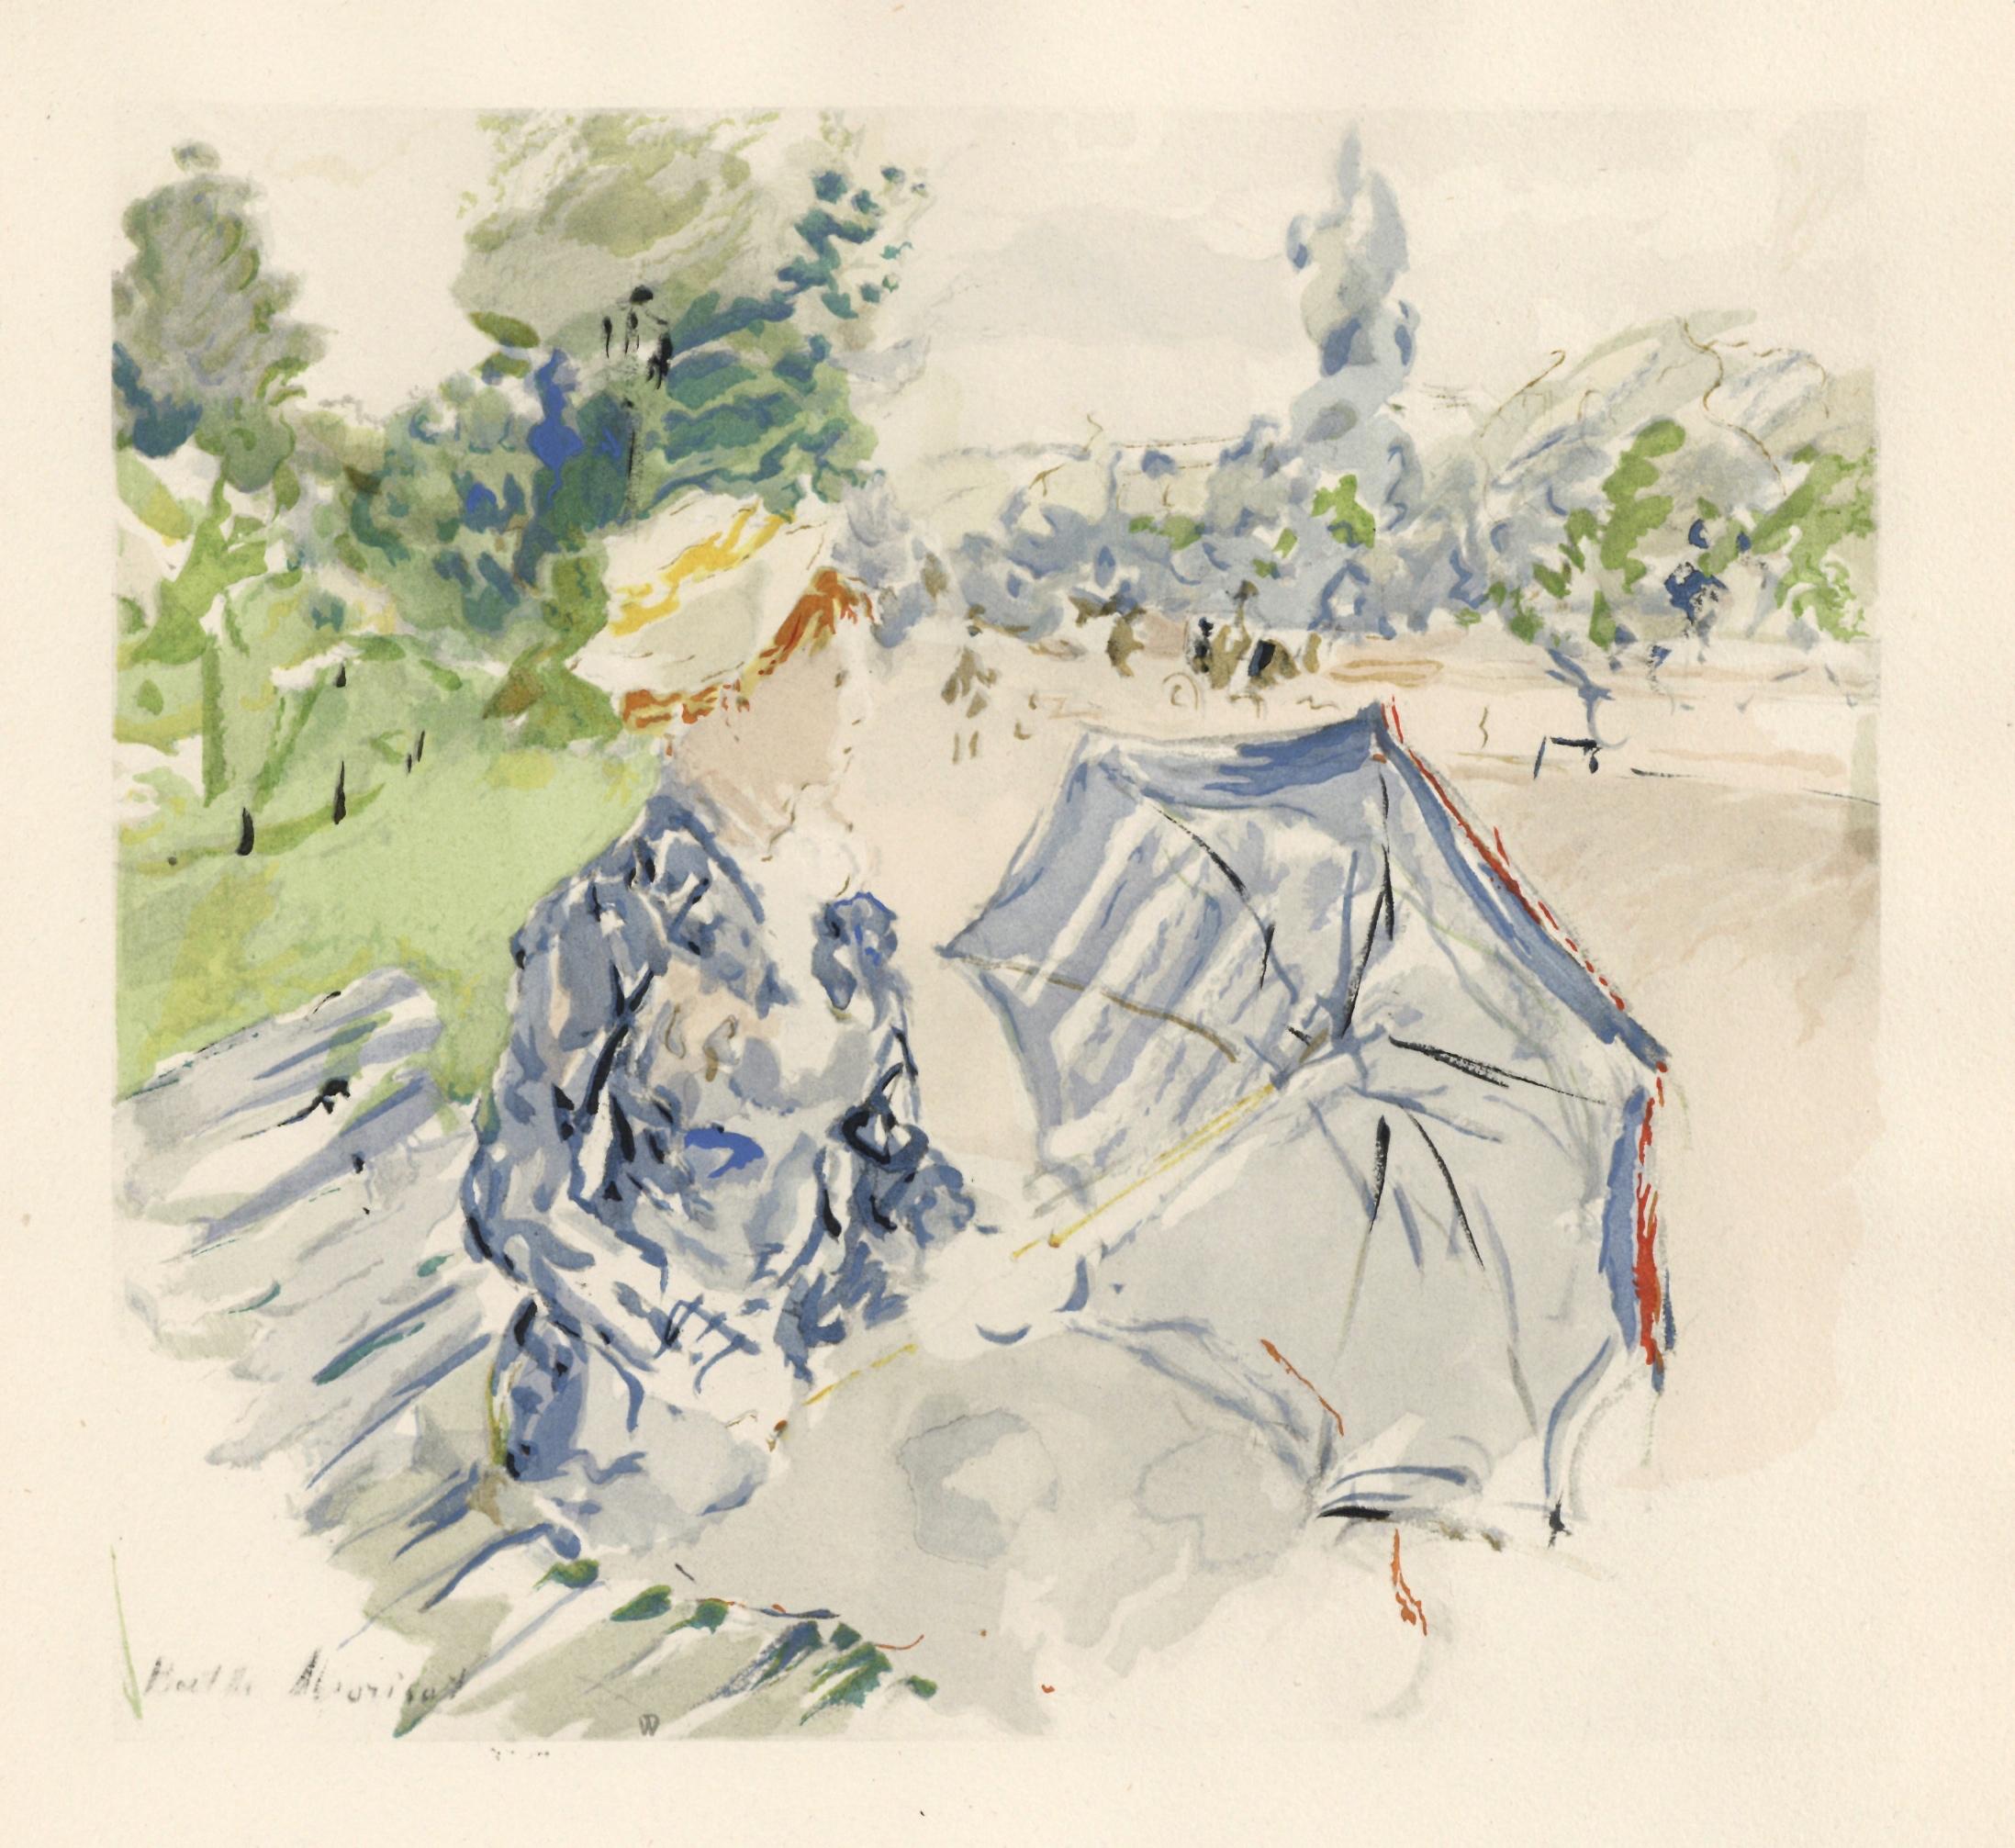 Medium: pochoir (after the 1885 watercolor). Printed 1946 in a limited edition of 300 for the rare "Berthe Morisot Seize Aquarelles" portfolio, published in Paris by Quatre Chemins. The image measures 7 1/2 x 7 3/4 inches (190 x 200 mm). The total